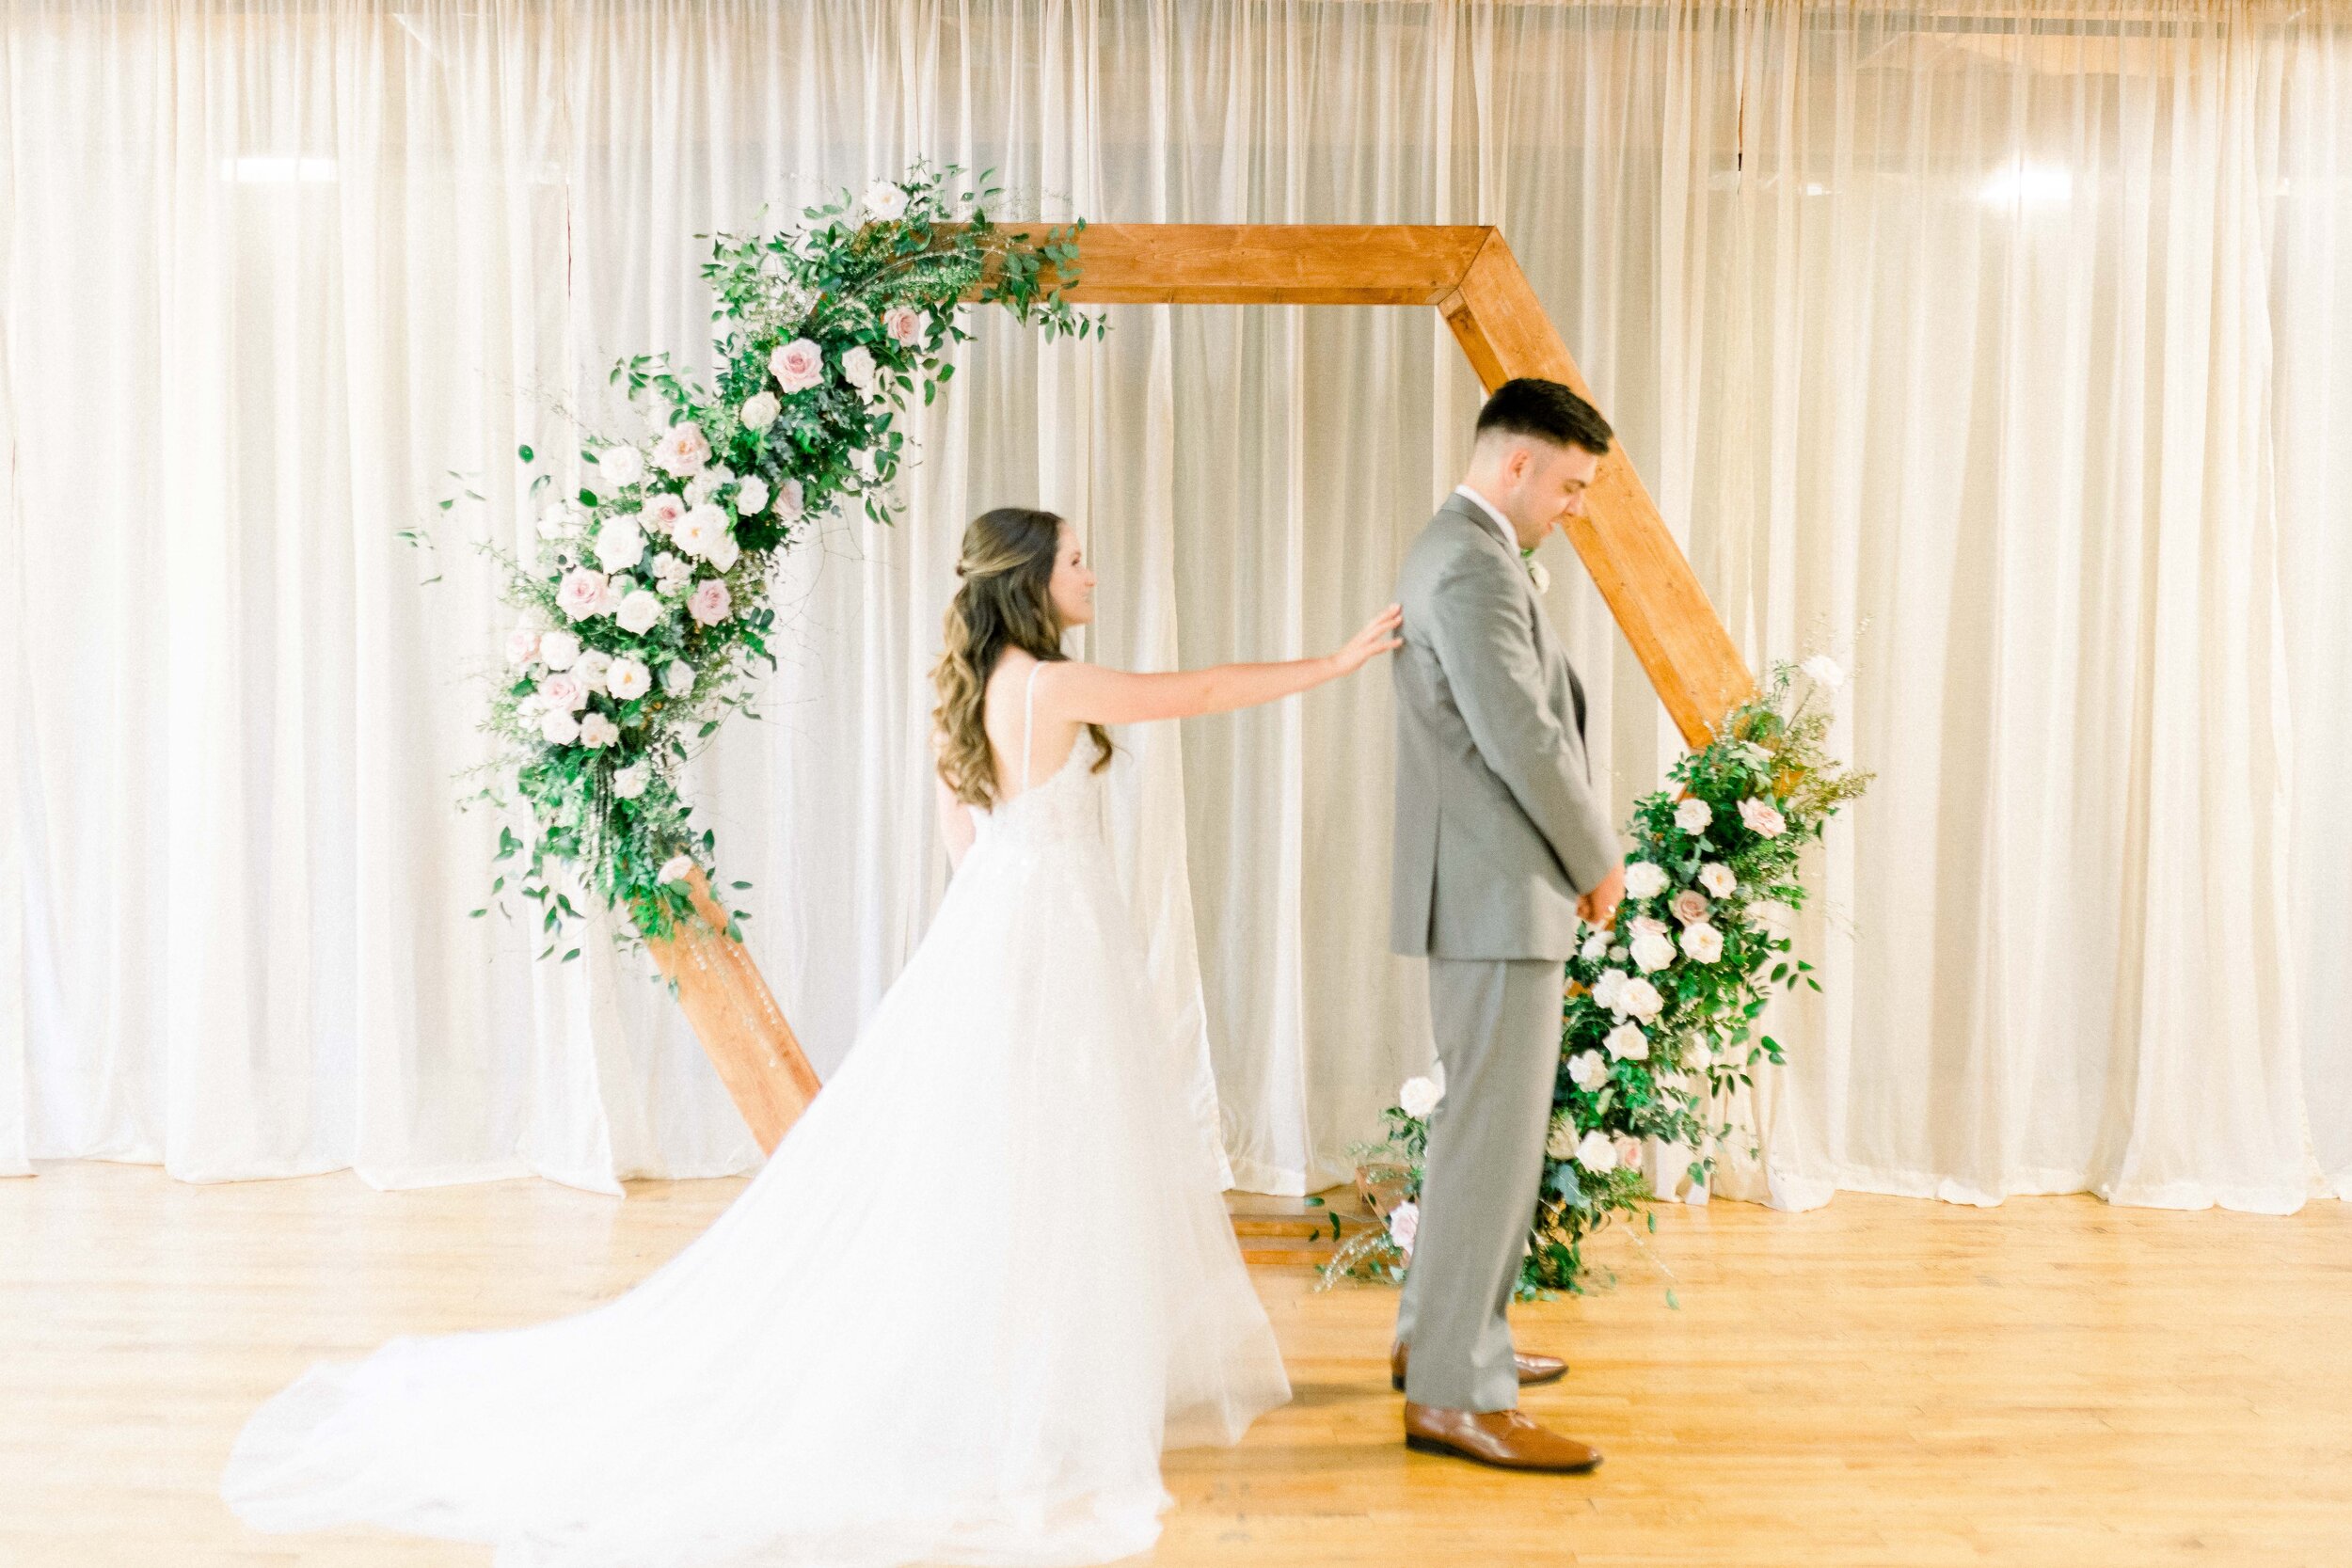 A hexagon arch makes the perfect ceremony backdrop. Blooms used here are blush quicksand roses, cream garden roses, white ranunculus, spray roses, and lush greenery. Designed by florist Rosemary & Finch in Nashville, TN.